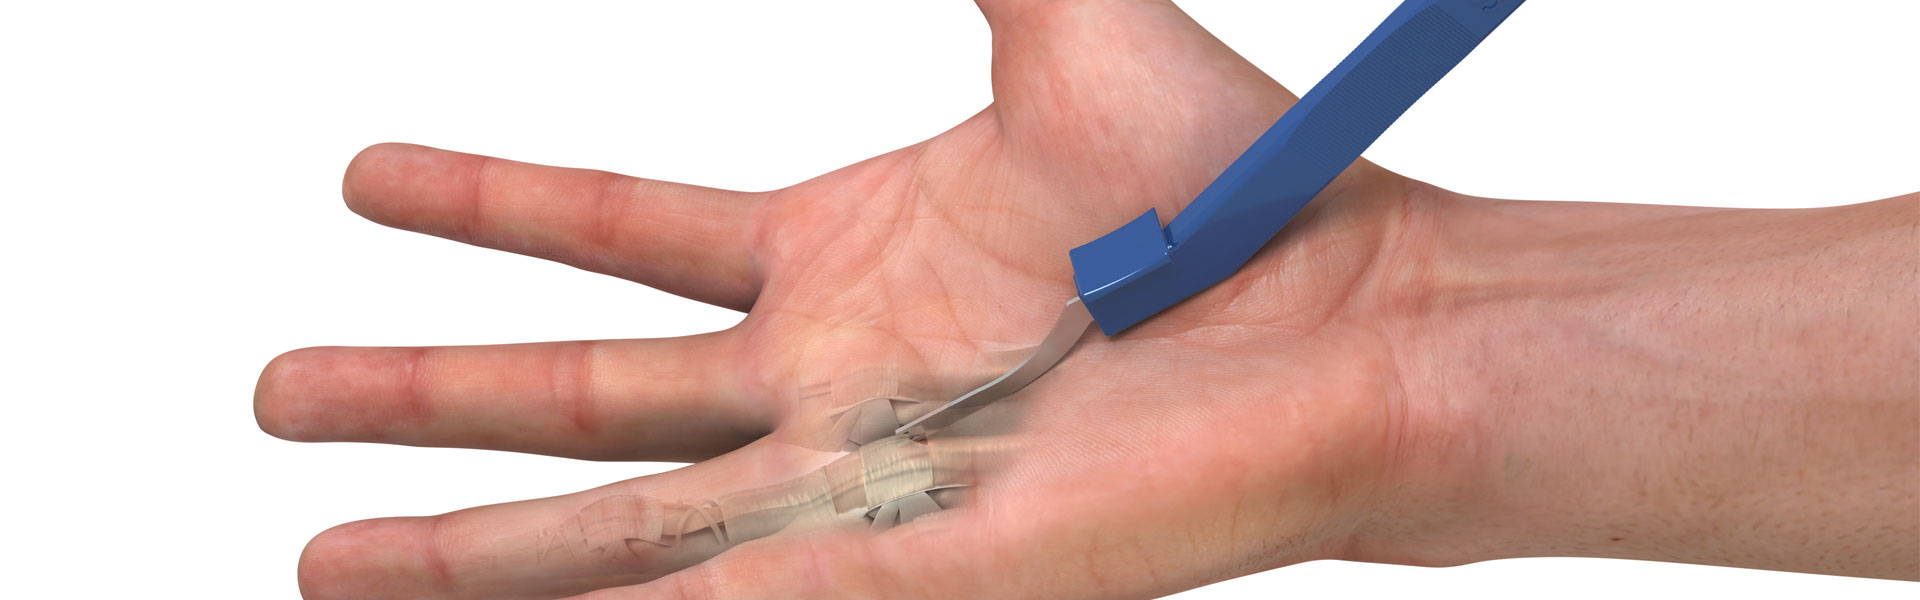 The Future of Minimally Invasive Surgery Helping Patient - 1 | S2S Surgical